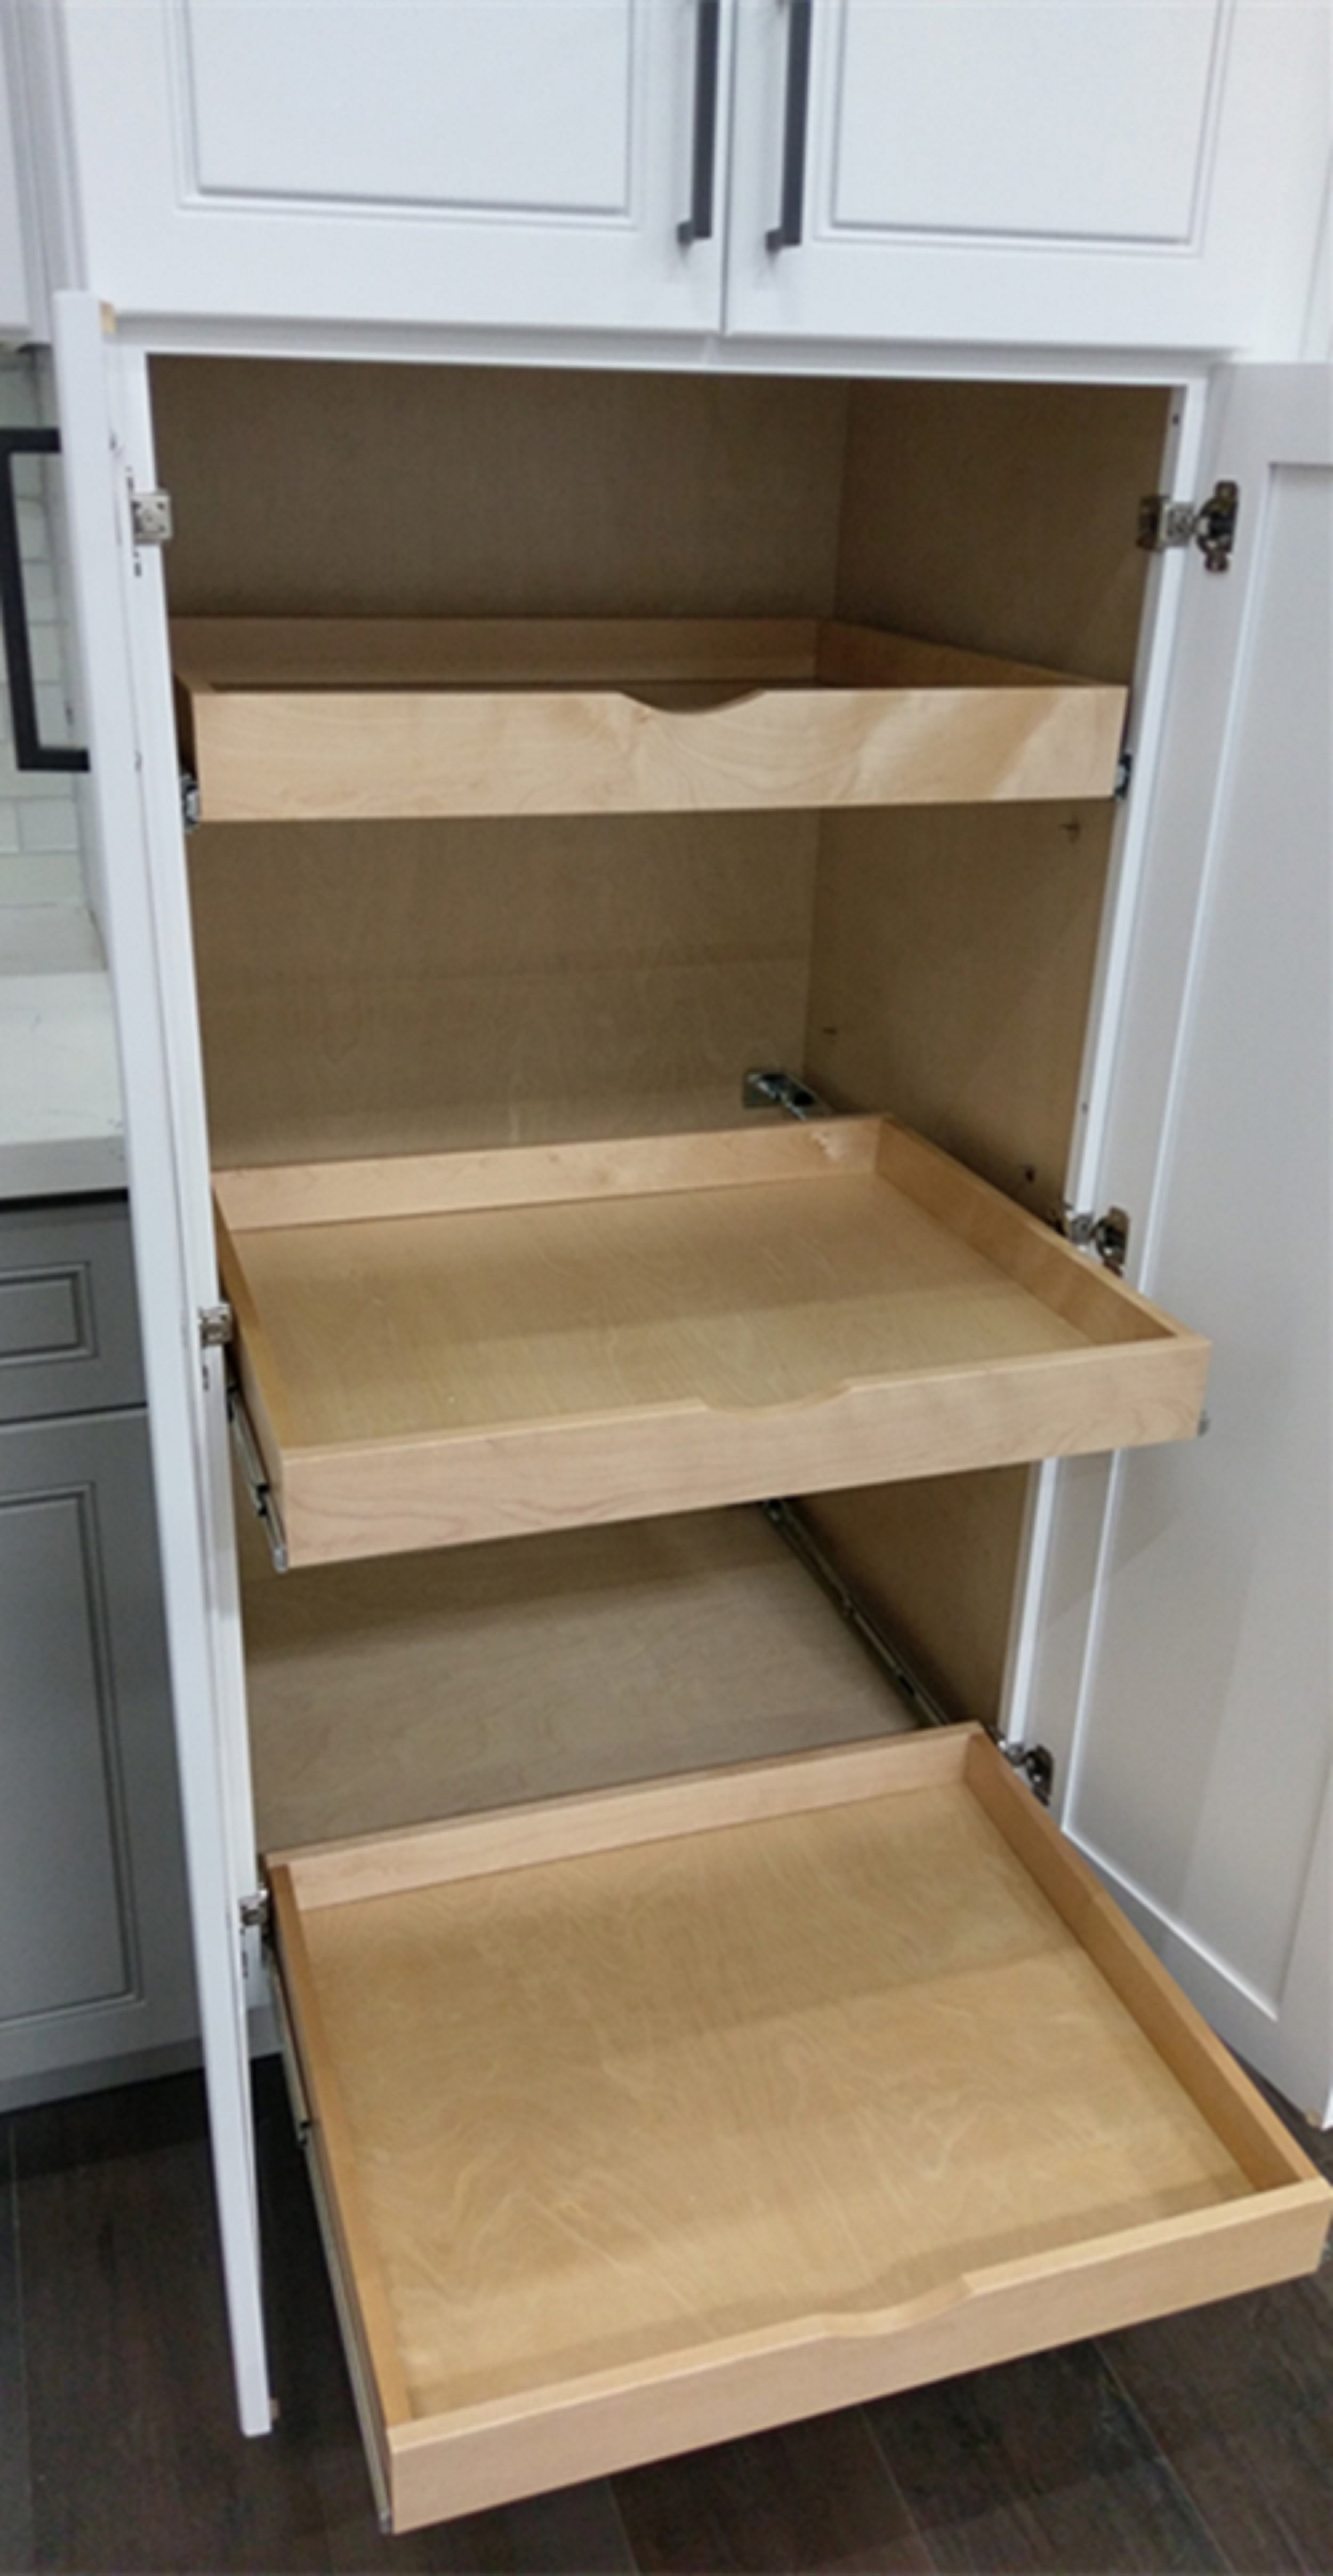 26'' Width Pull-Out For Kitchen Cabinet Pantry Organizer Wood Roll out Tray  Drawer Box Cab. Slide Out Shelve Shelf, Include Full Extension Ball Bearing  Sliding Rails (fits RTA cabinet B30 & Pantry